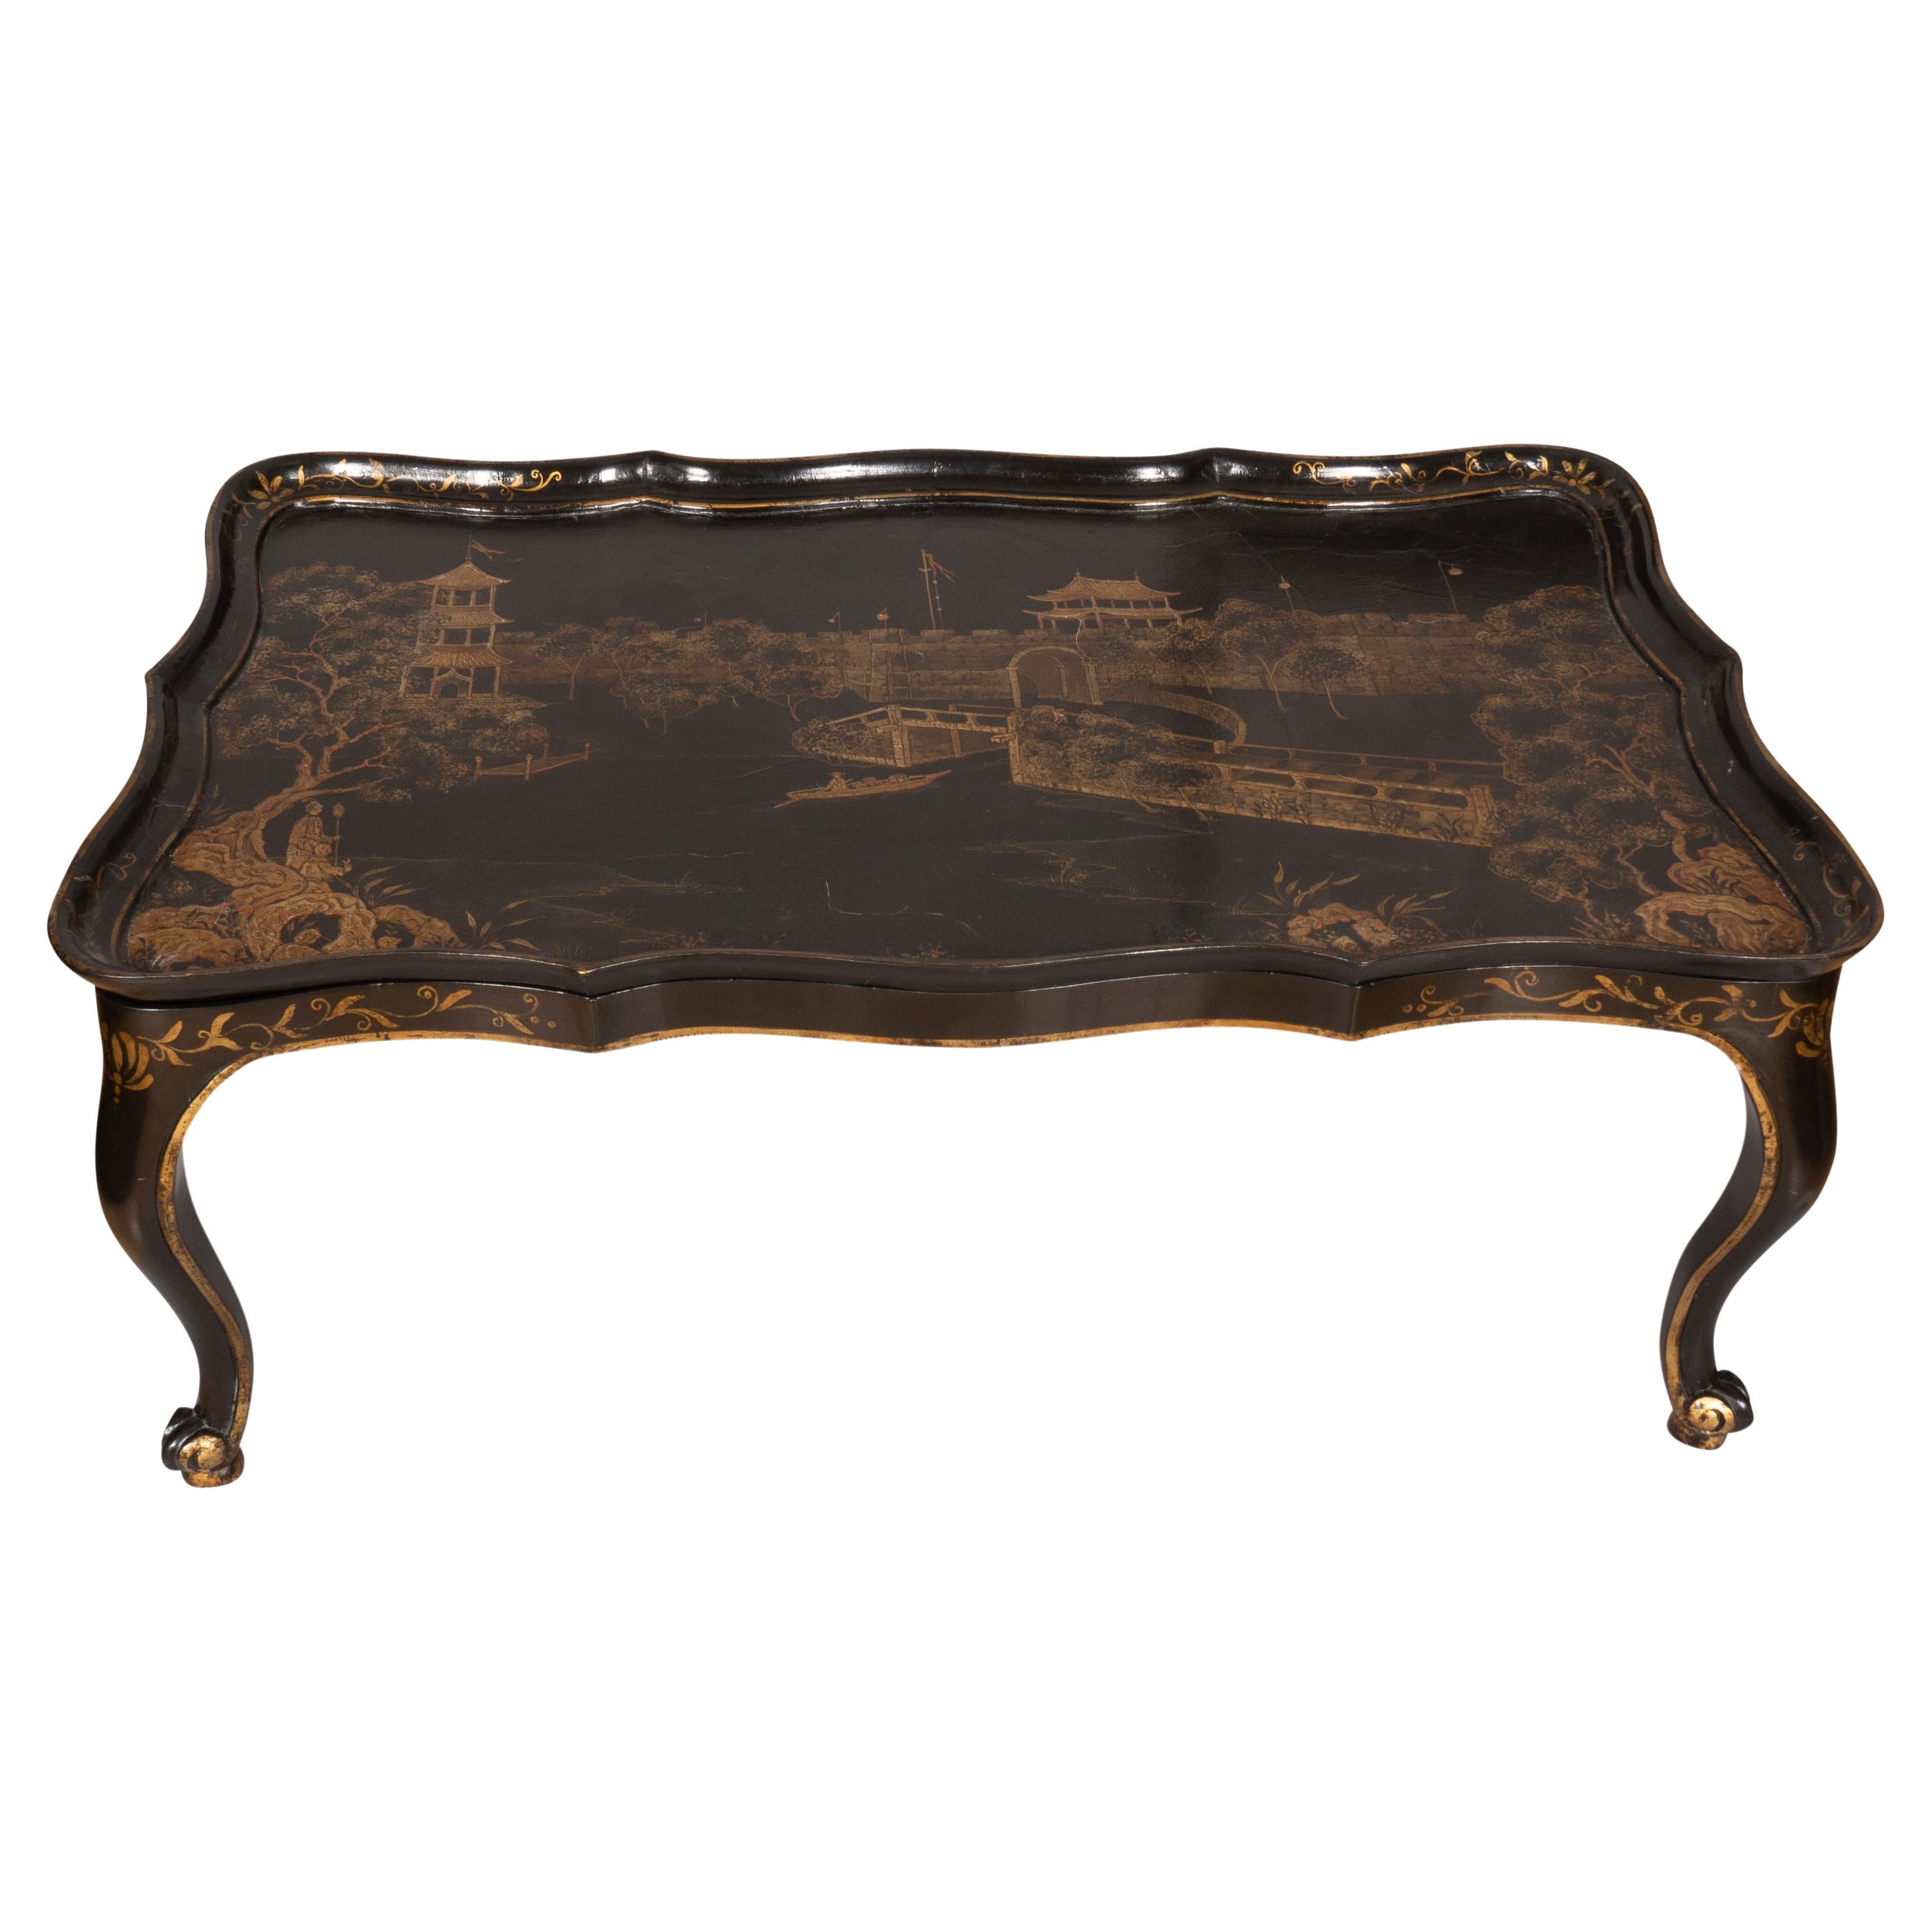 Chinoiserie Decorated Lacquer Coffee Table